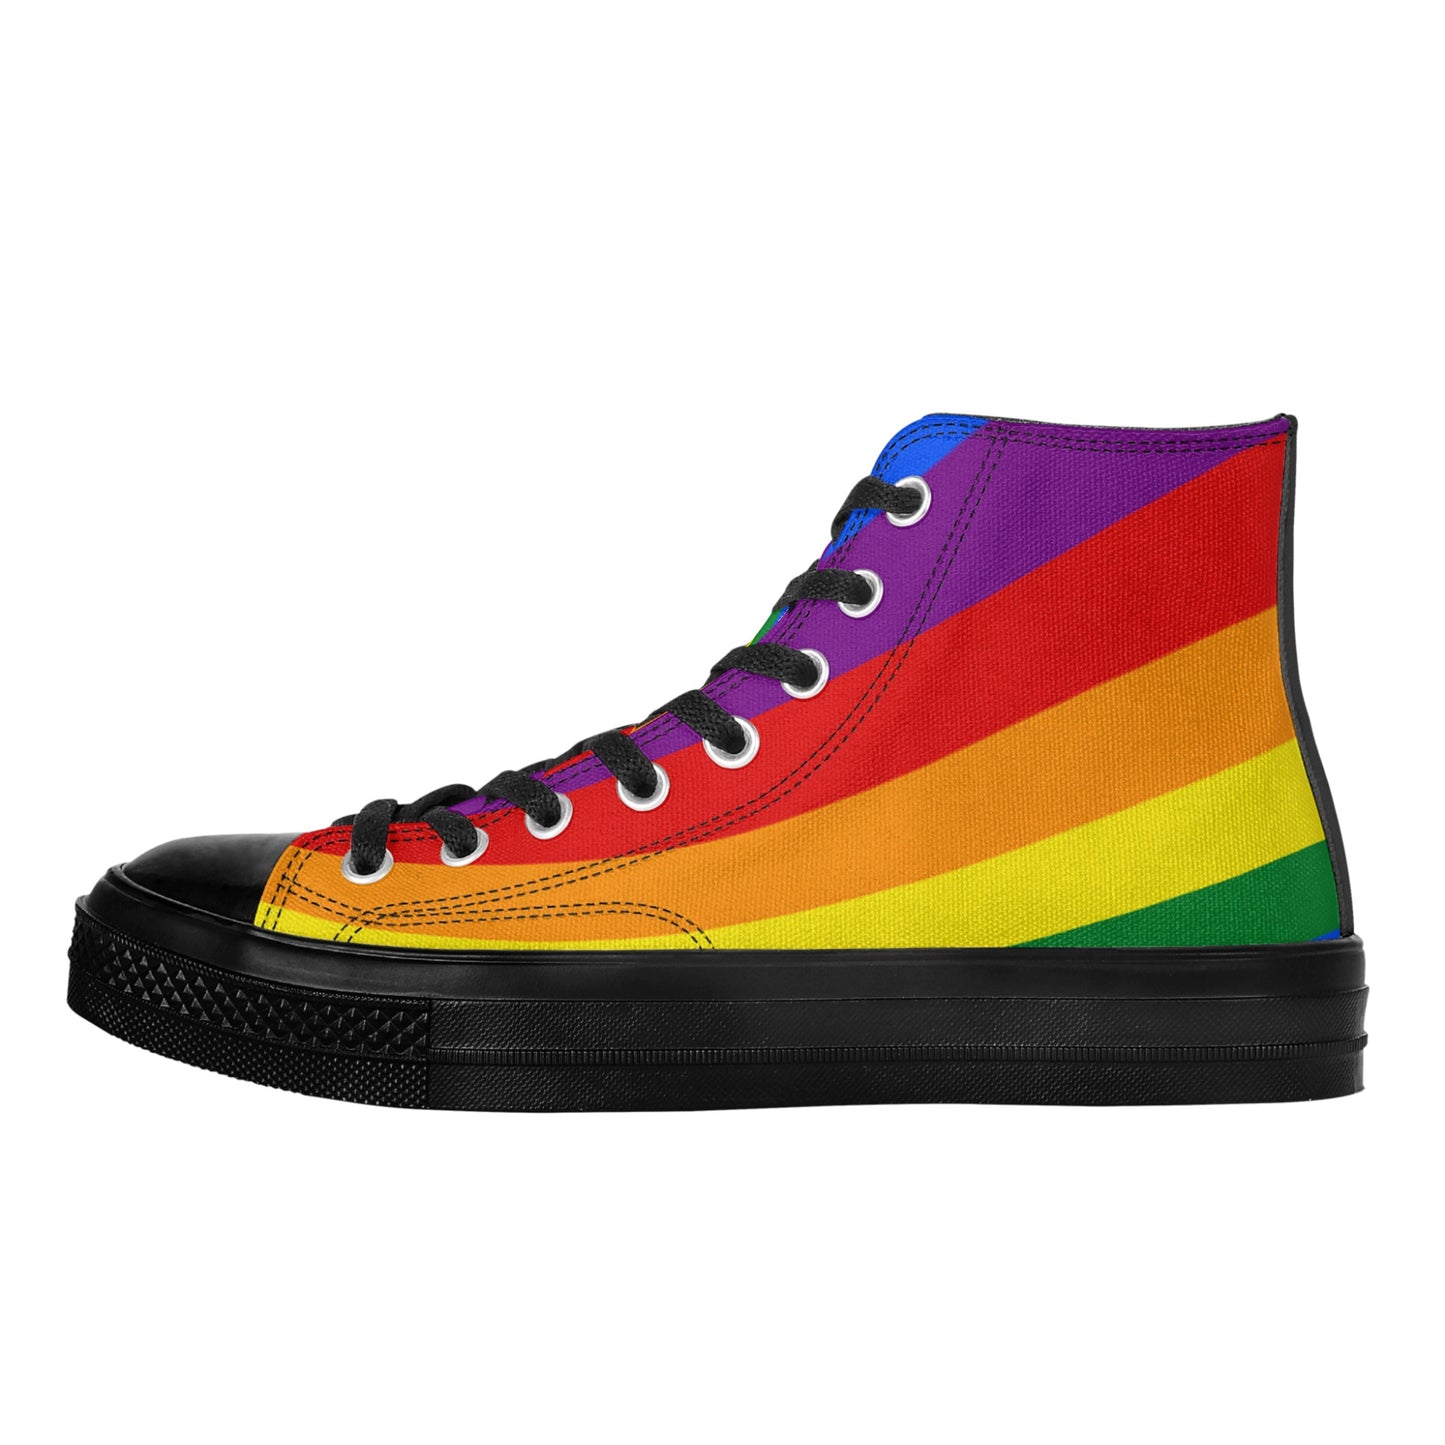 Rainbow Pride Collection - Mens Classic Black High Top Canvas Shoes for the LGBTQIA+ community